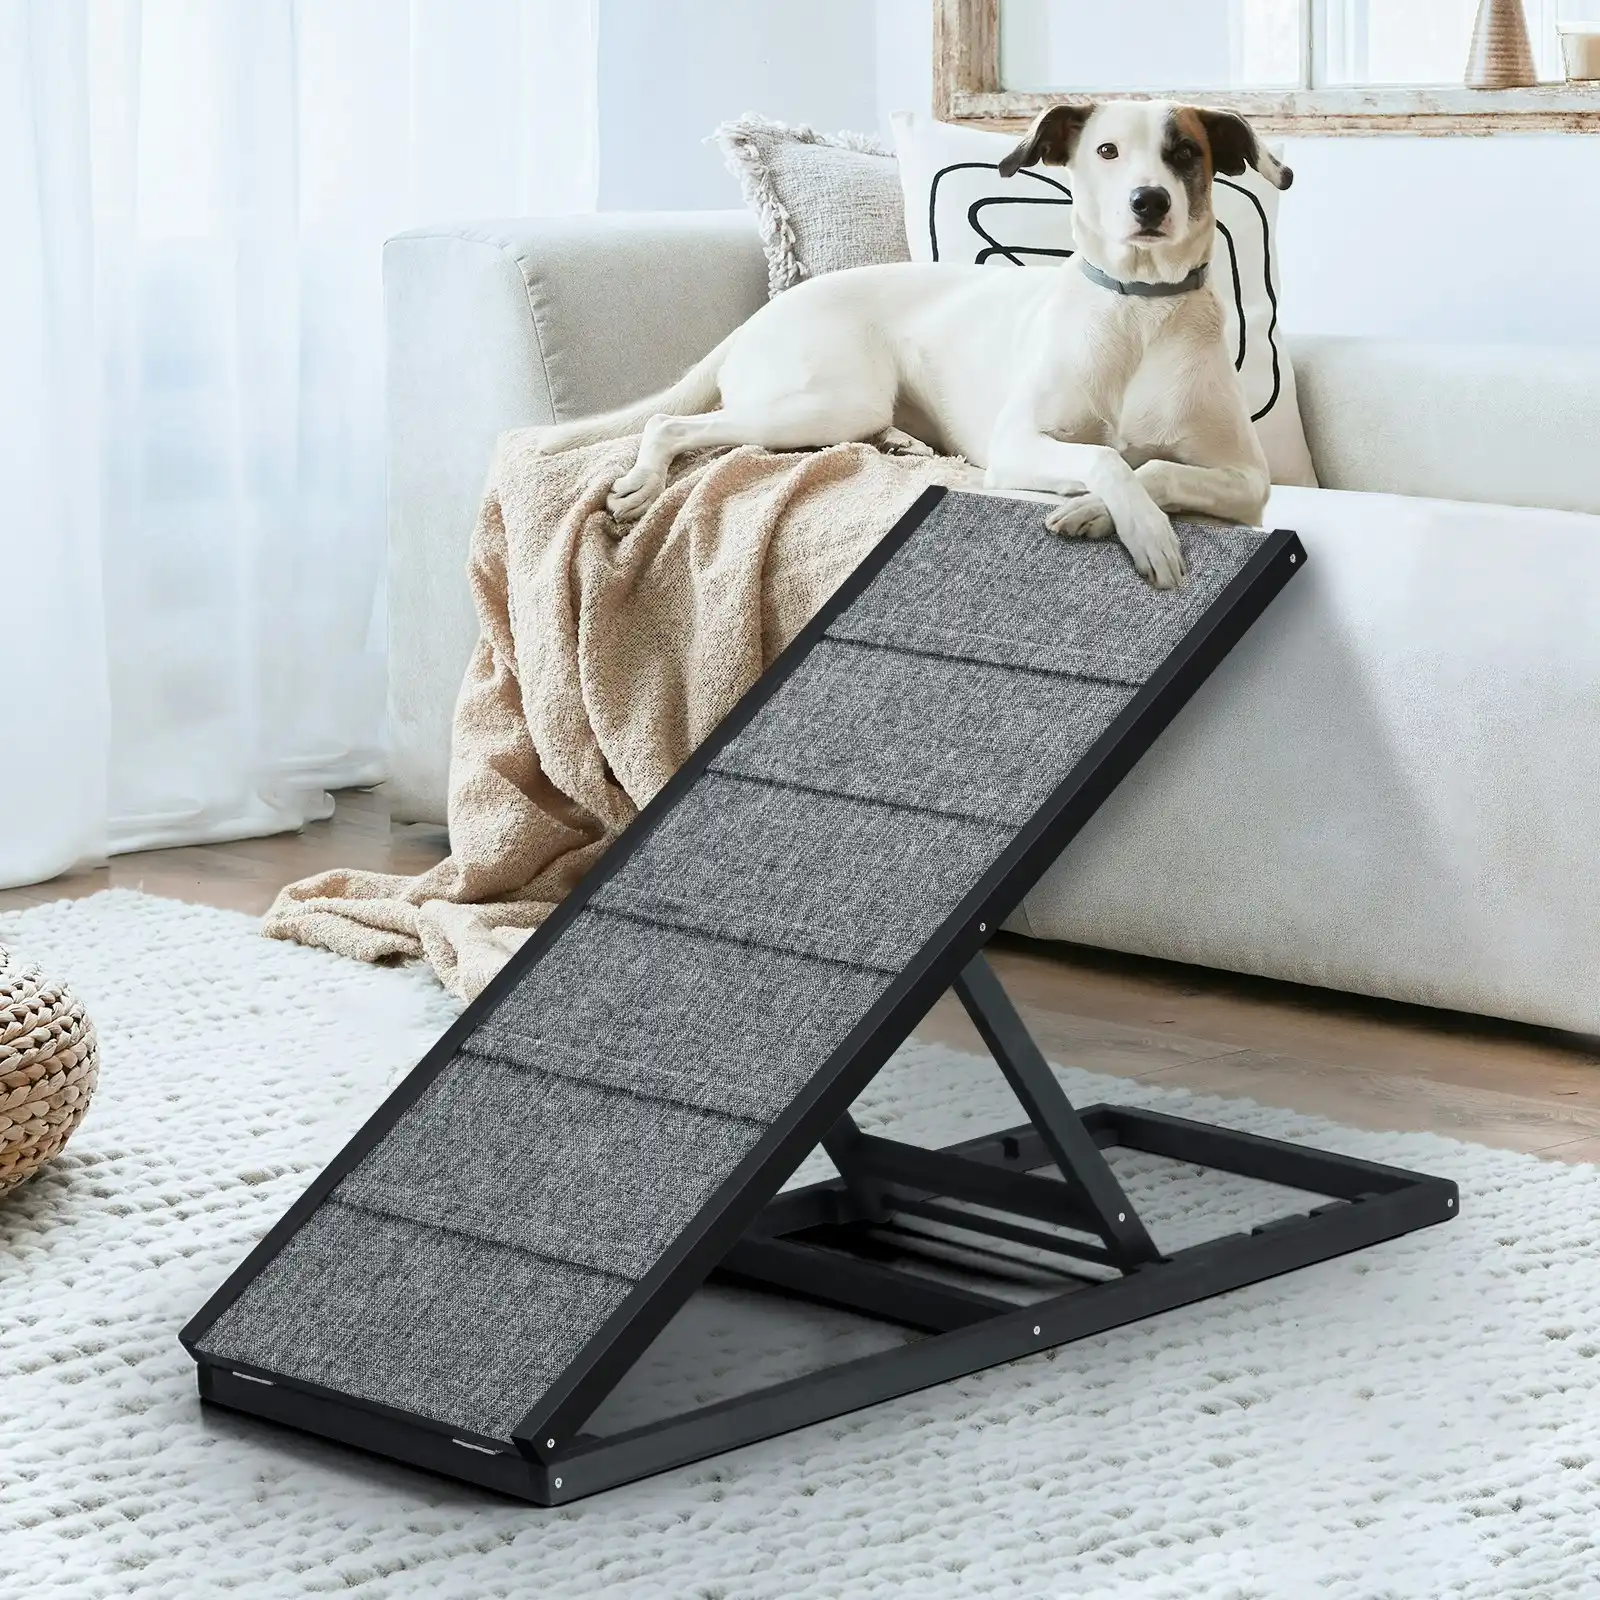 Alopet Dog Pet Ramp Adjustable Height Dogs Stairs Bed Sofa Car Foldable 100cm